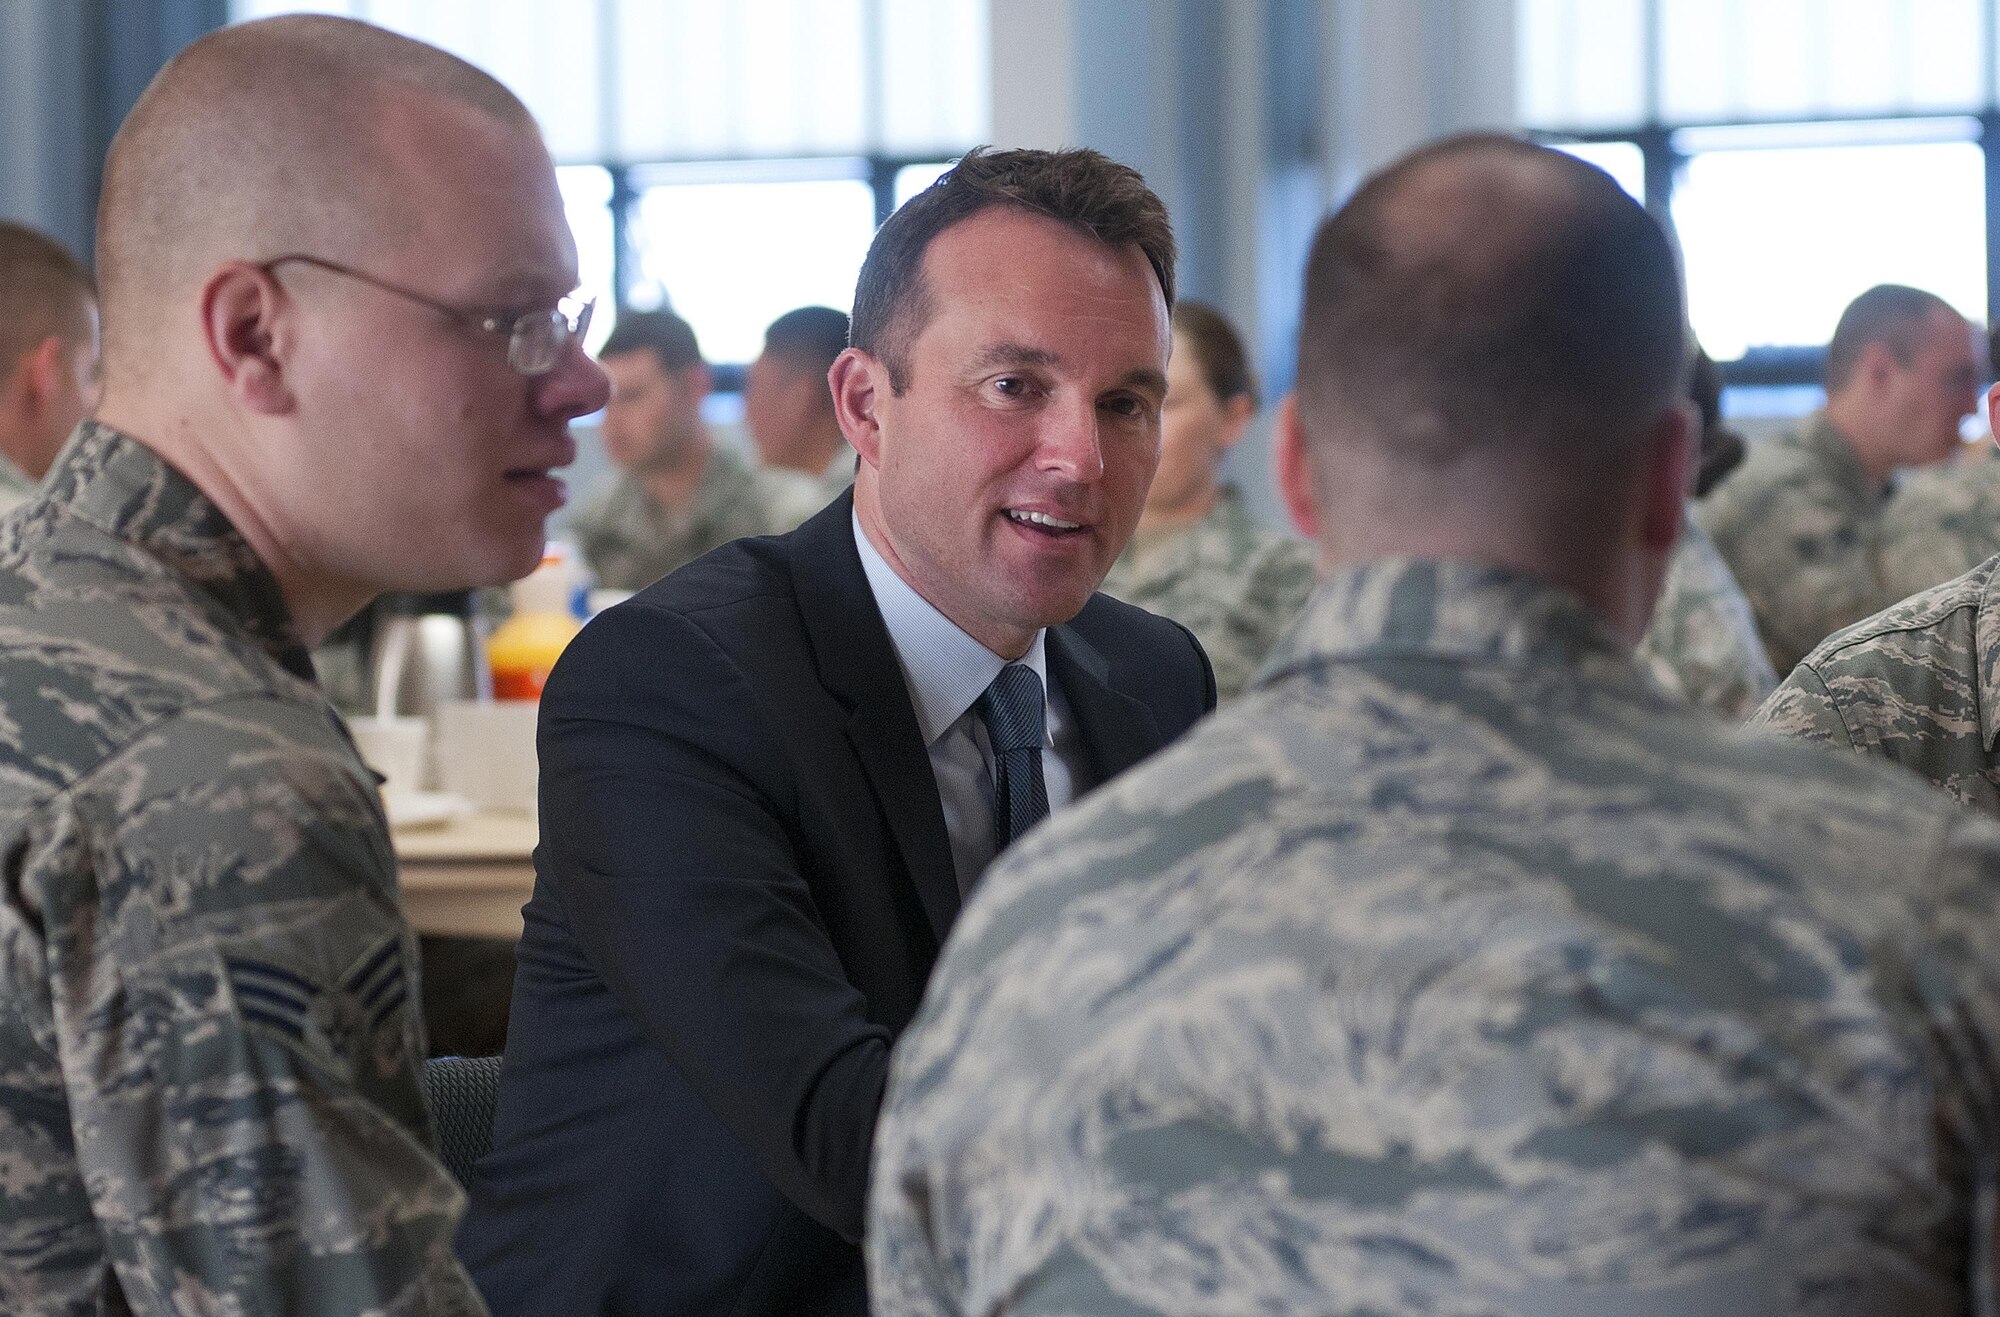 Acting Secretary of the Air Force Eric Fanning, visits with Senior Airmen David Chupak and Christopher Baskerville during breakfast with Airman Leadership School students August 16, 2013, at F.E. Warren Air Force Base, Wyo. Fanning visited the base in an effort to familarize himself with the variety of missions conducted throughout the Air Force after assuming his duties as secretary.